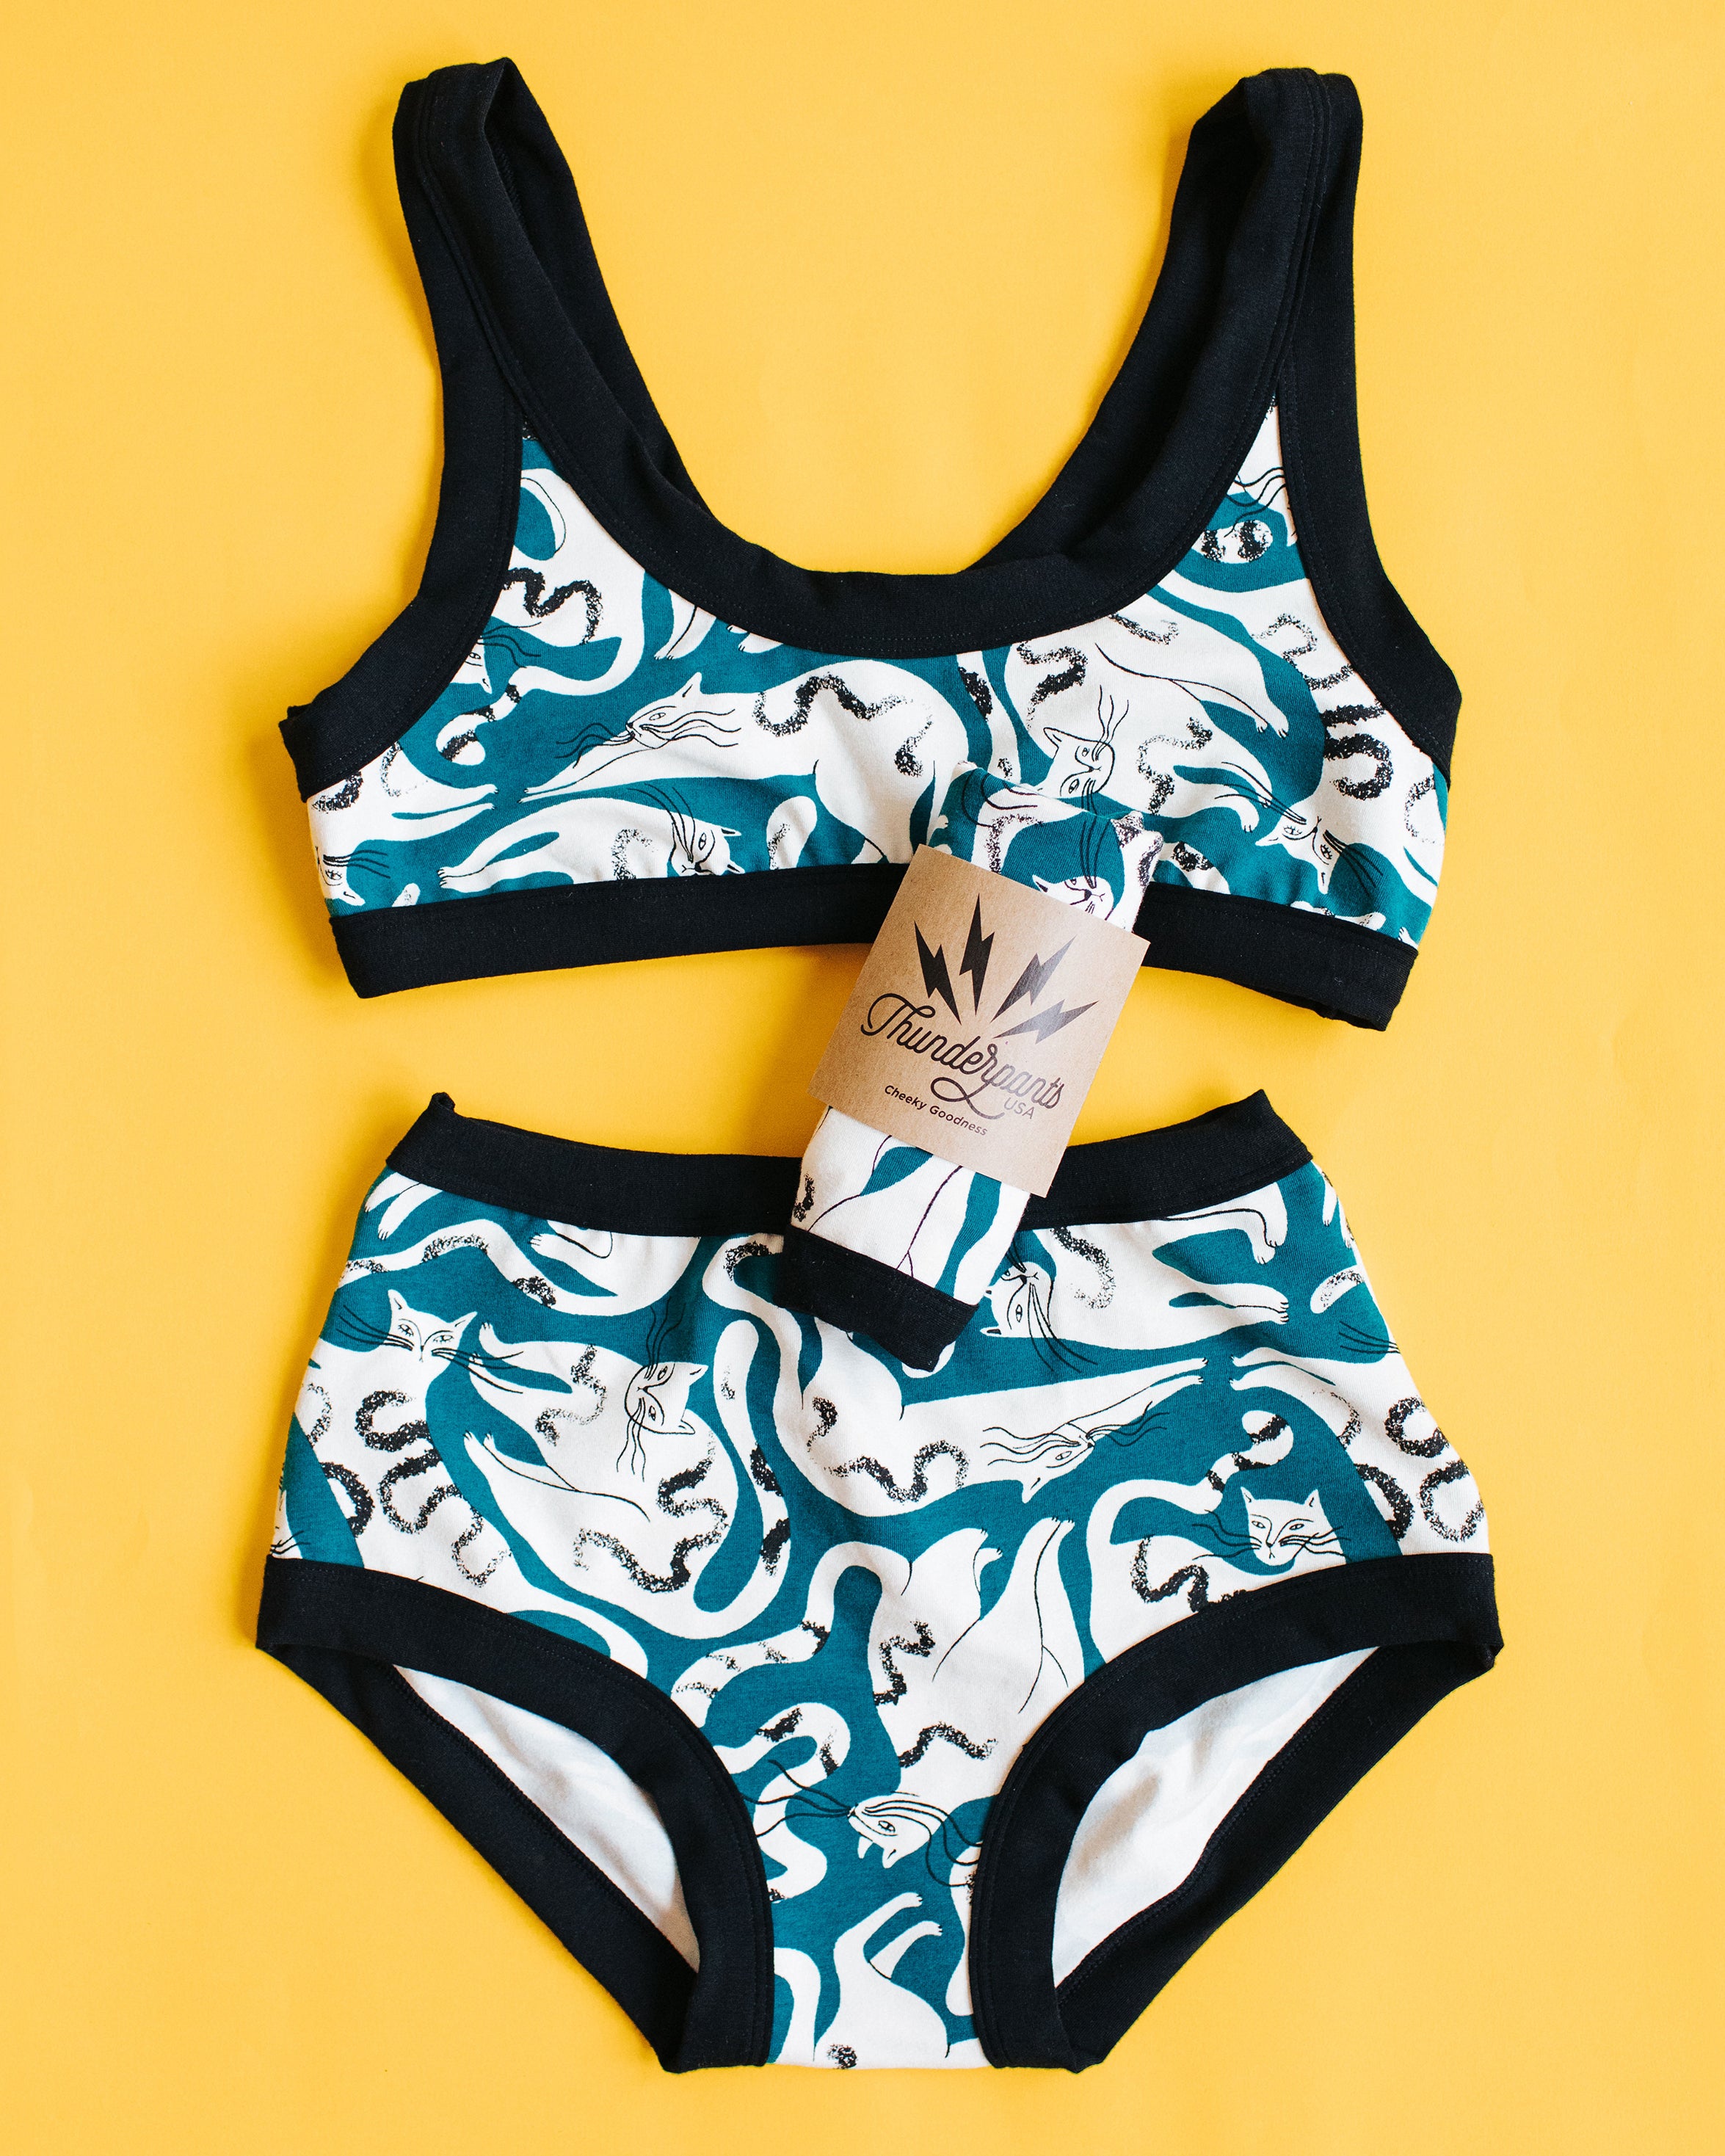 Flat lay on yellow background of Thunderpants Original style underwear and Bralette set in Hey Meow! print - green with white cats.